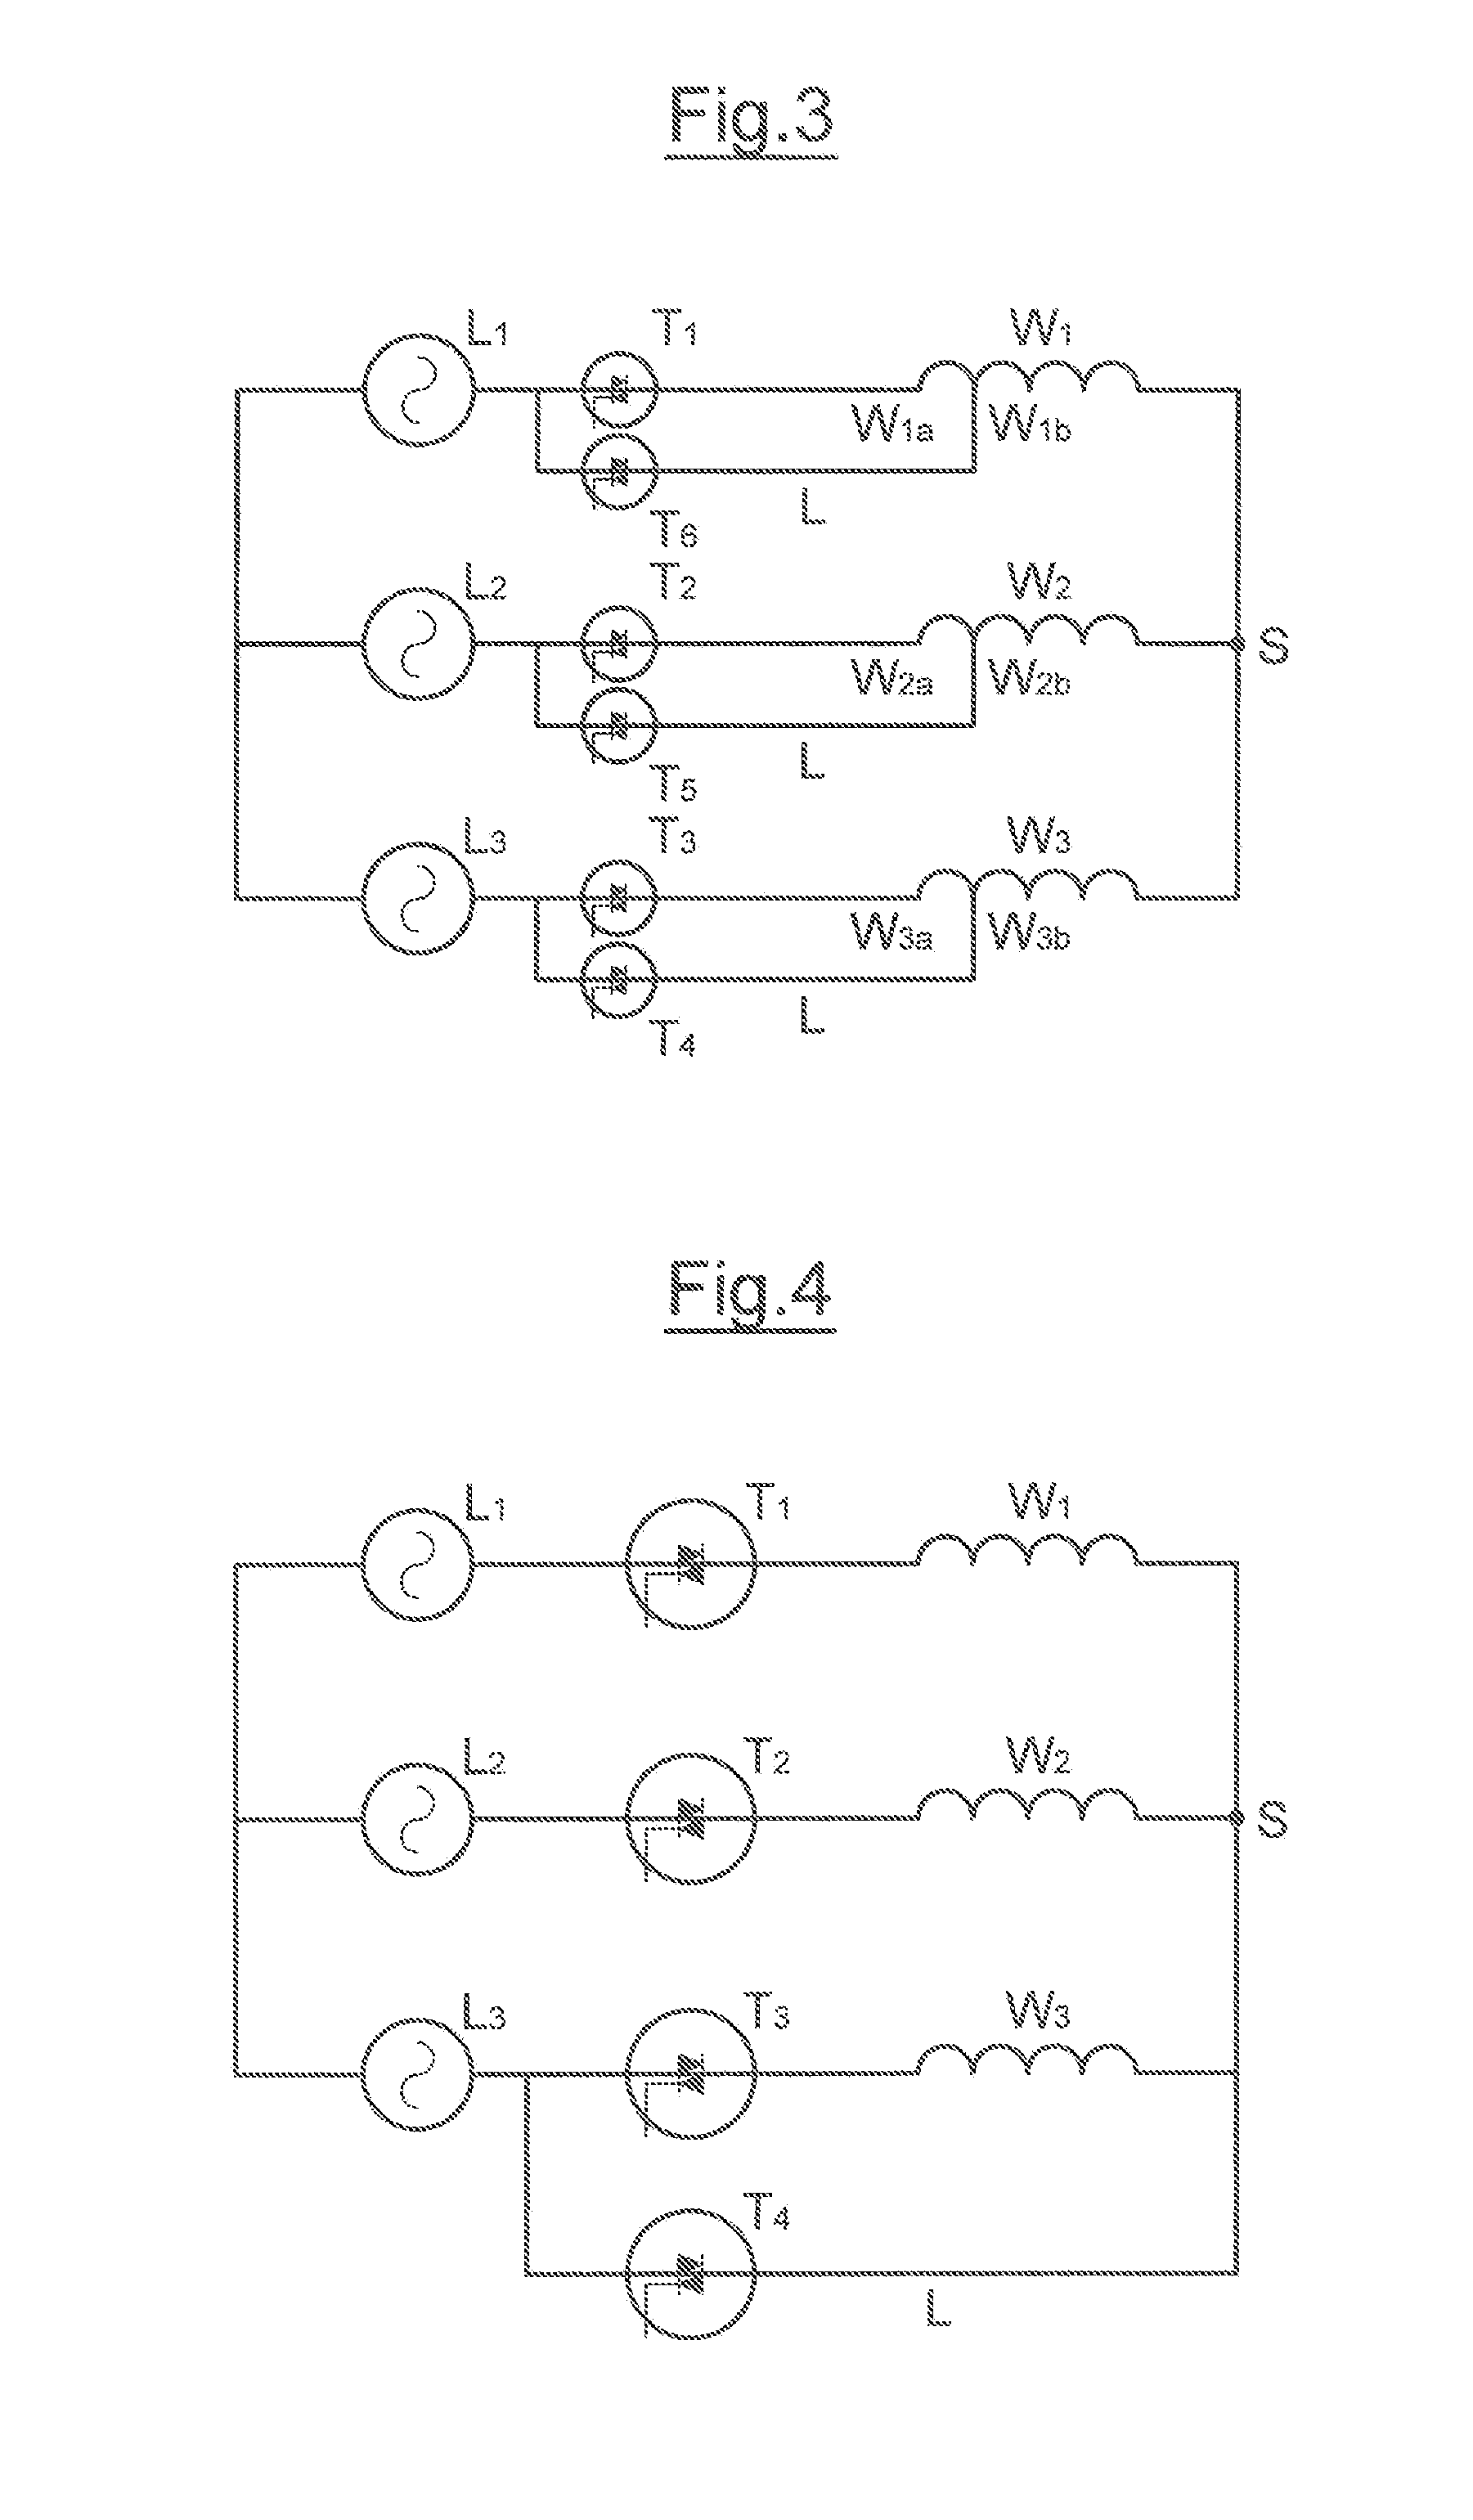 Method for controlling a multiphase electric motor operating in star-connected mode